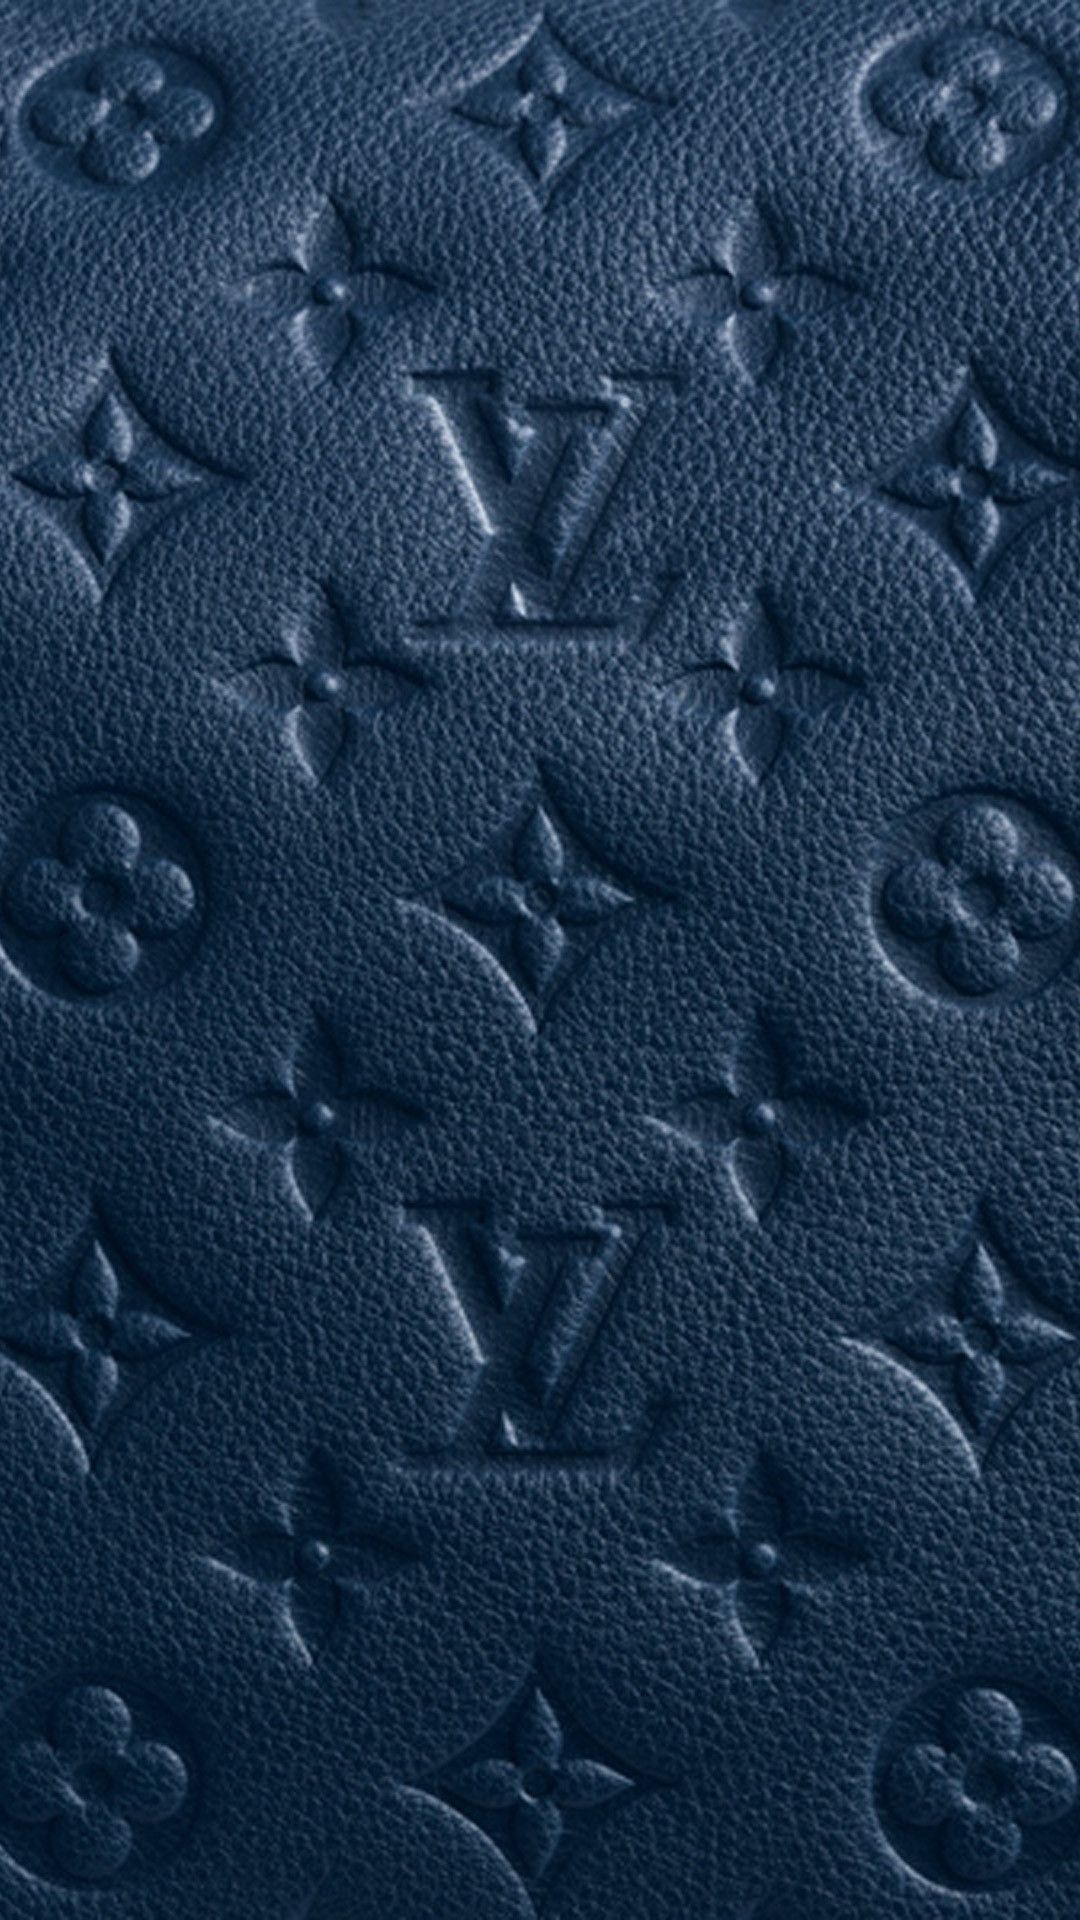 Louis Vuitton Wallpaper Hyper Realistic and Intricate · Creative